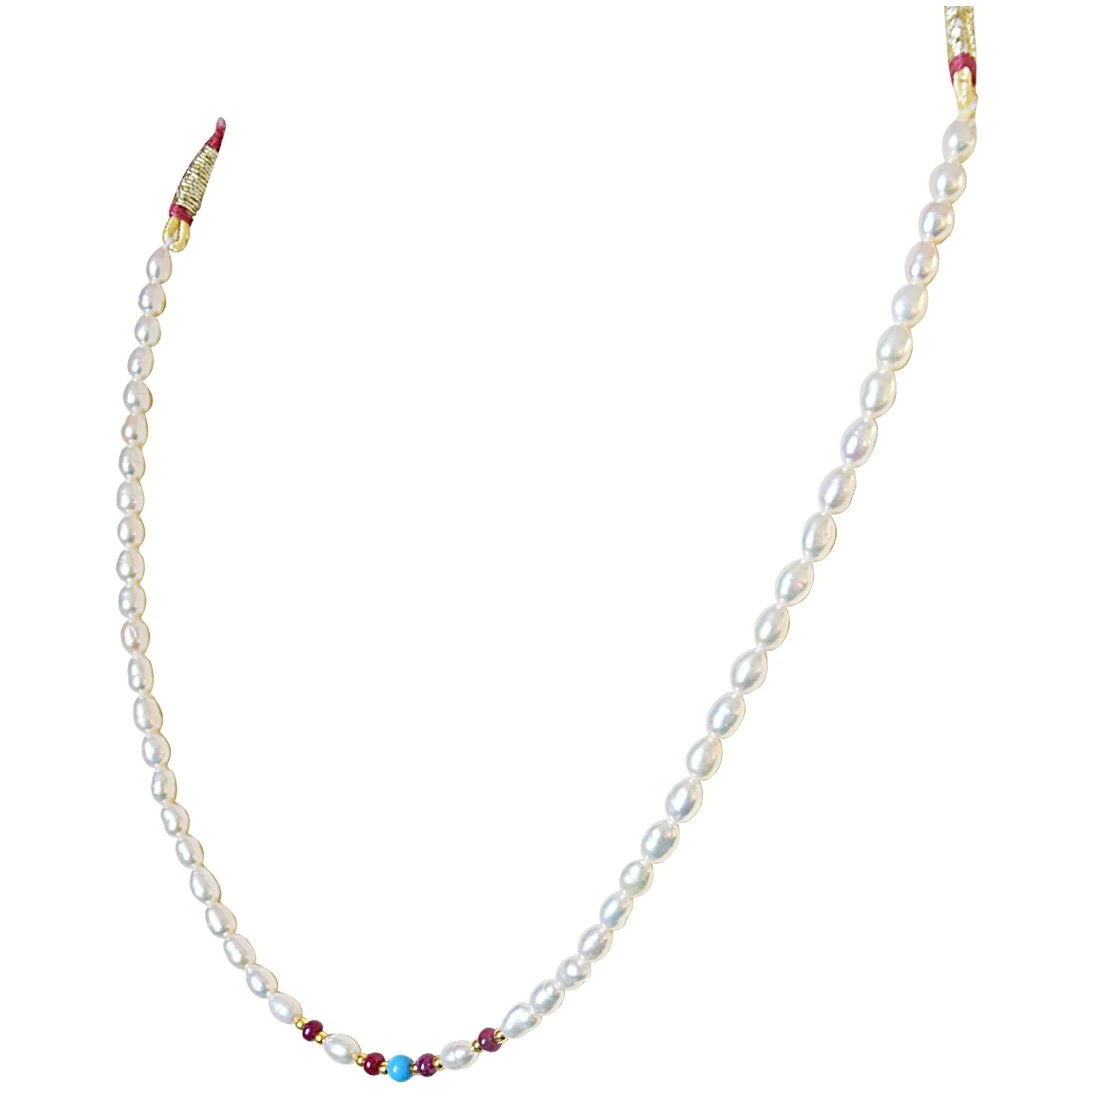 Single line Turquoise Bead, Ruby Beads and Rice Pearl Necklace for Women (SN492)